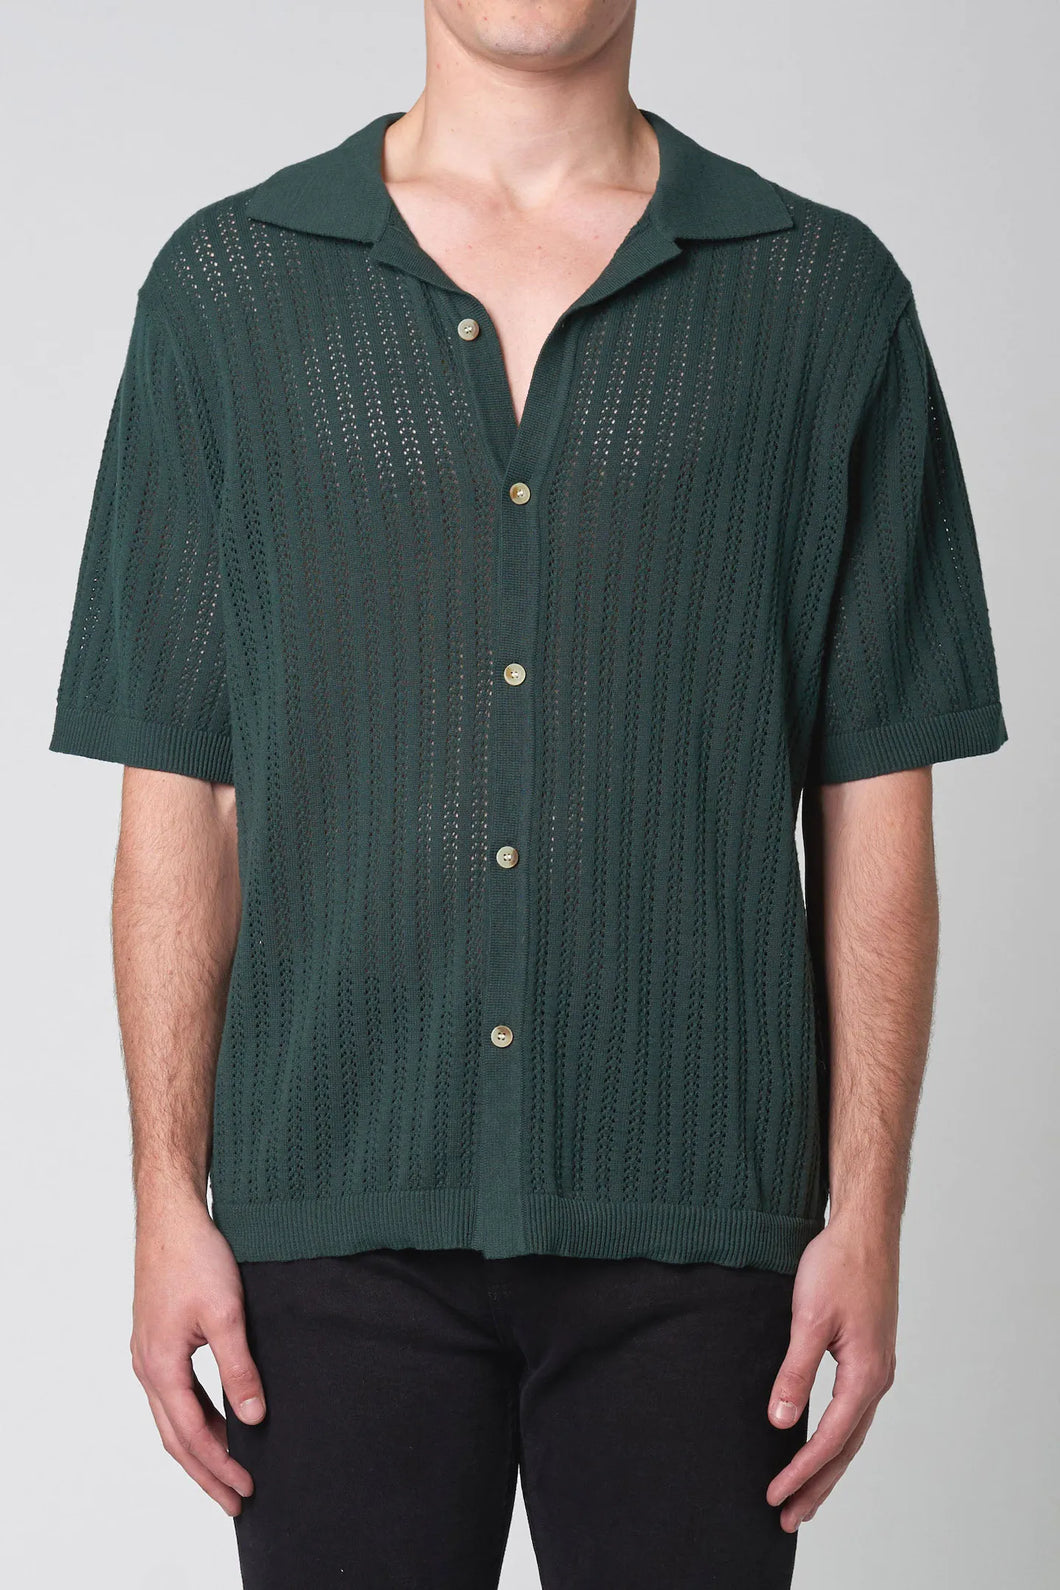 Rolla's Bowler Knit Shirt Thyme